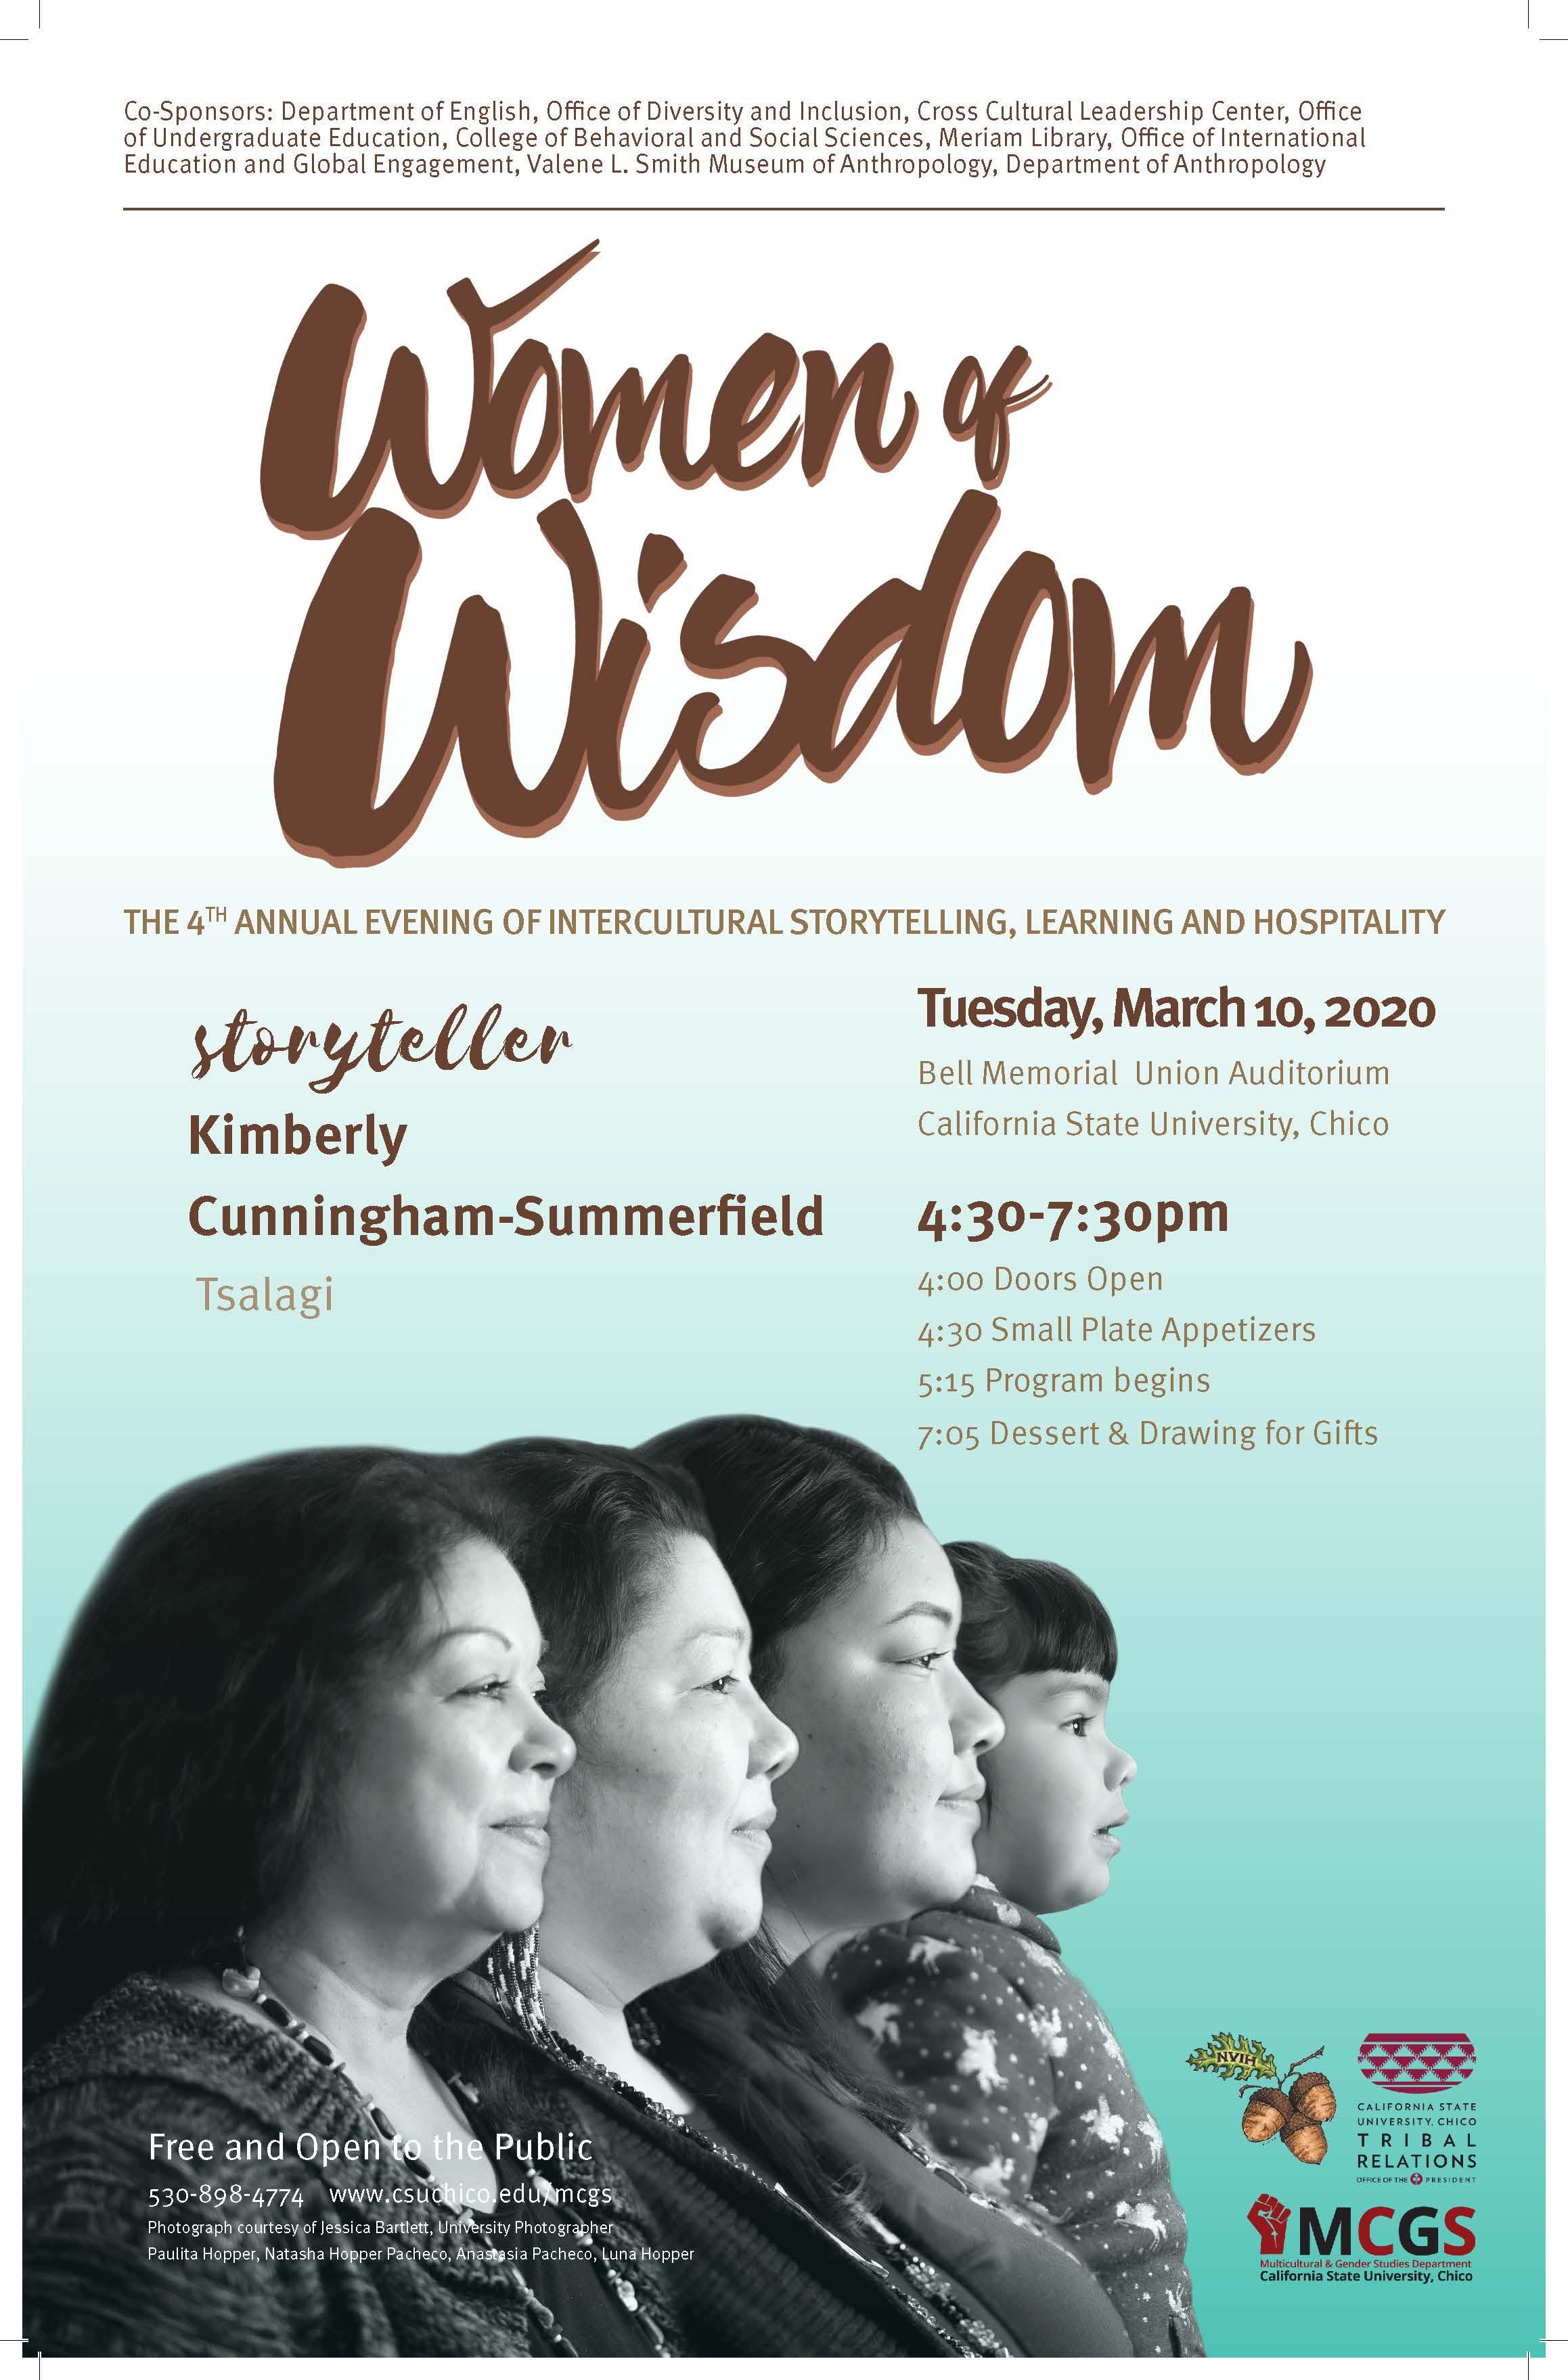 Women of wisdom IV. March 10, 2020. 4:30-7:30pm at the BMU.